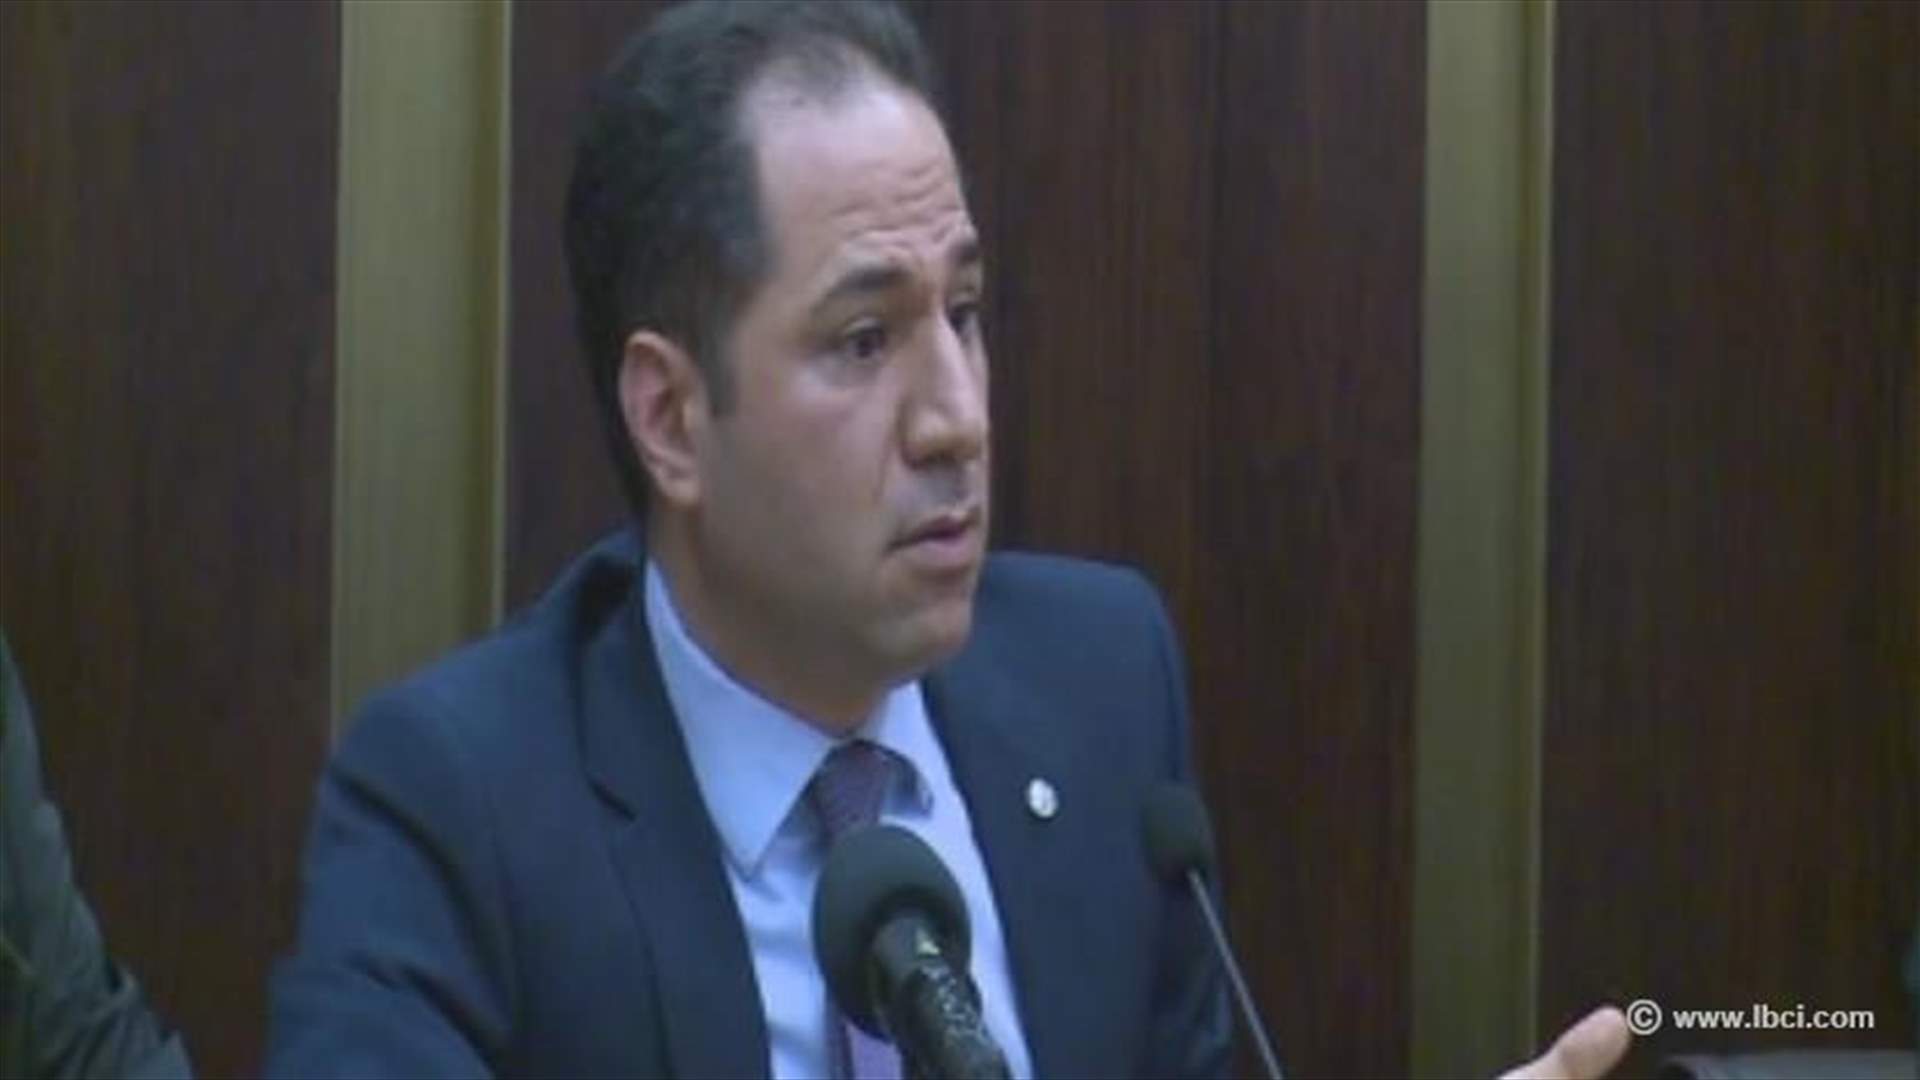 MP Gemayel slams accusations targeting the Kataeb, says proposed taxes are not secret